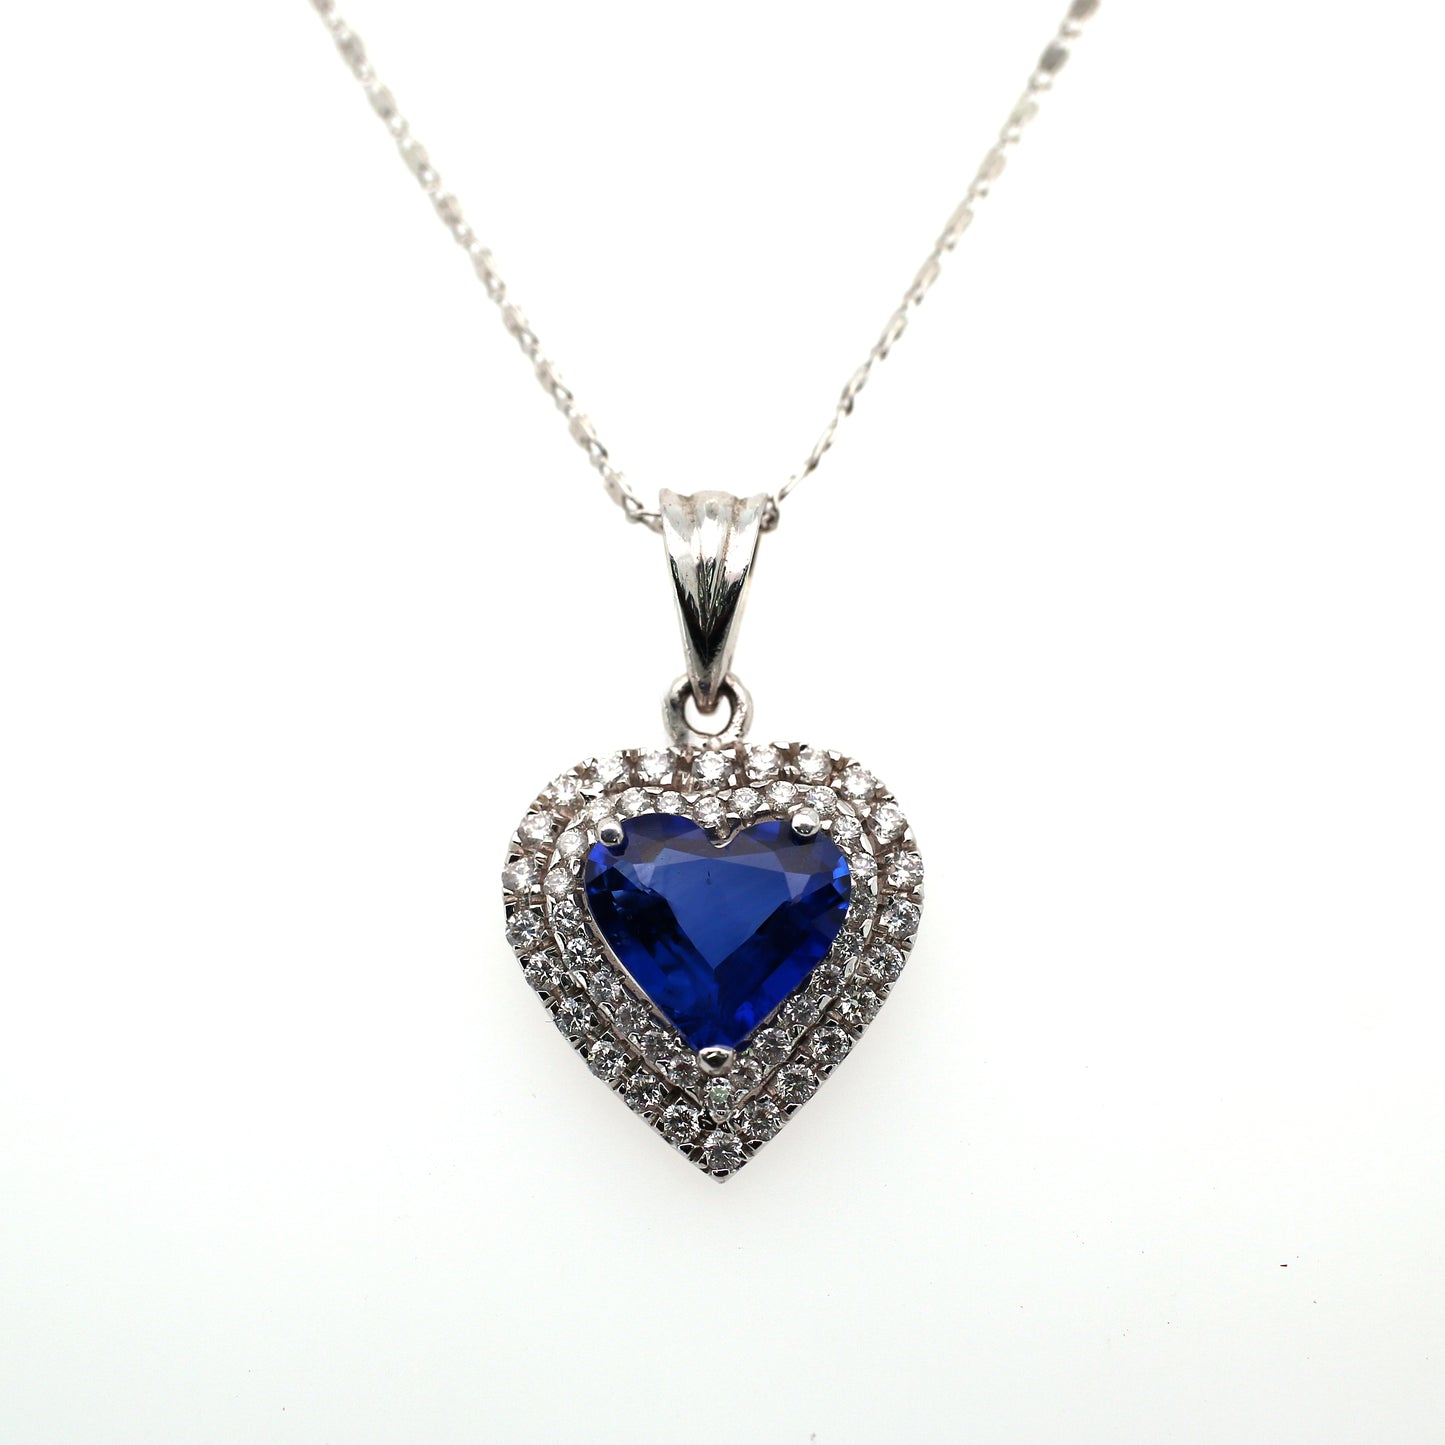 Stunning Heart Pendant Elaborated with Blue Sapphire Beauty is enhanced by addition of White Diamond